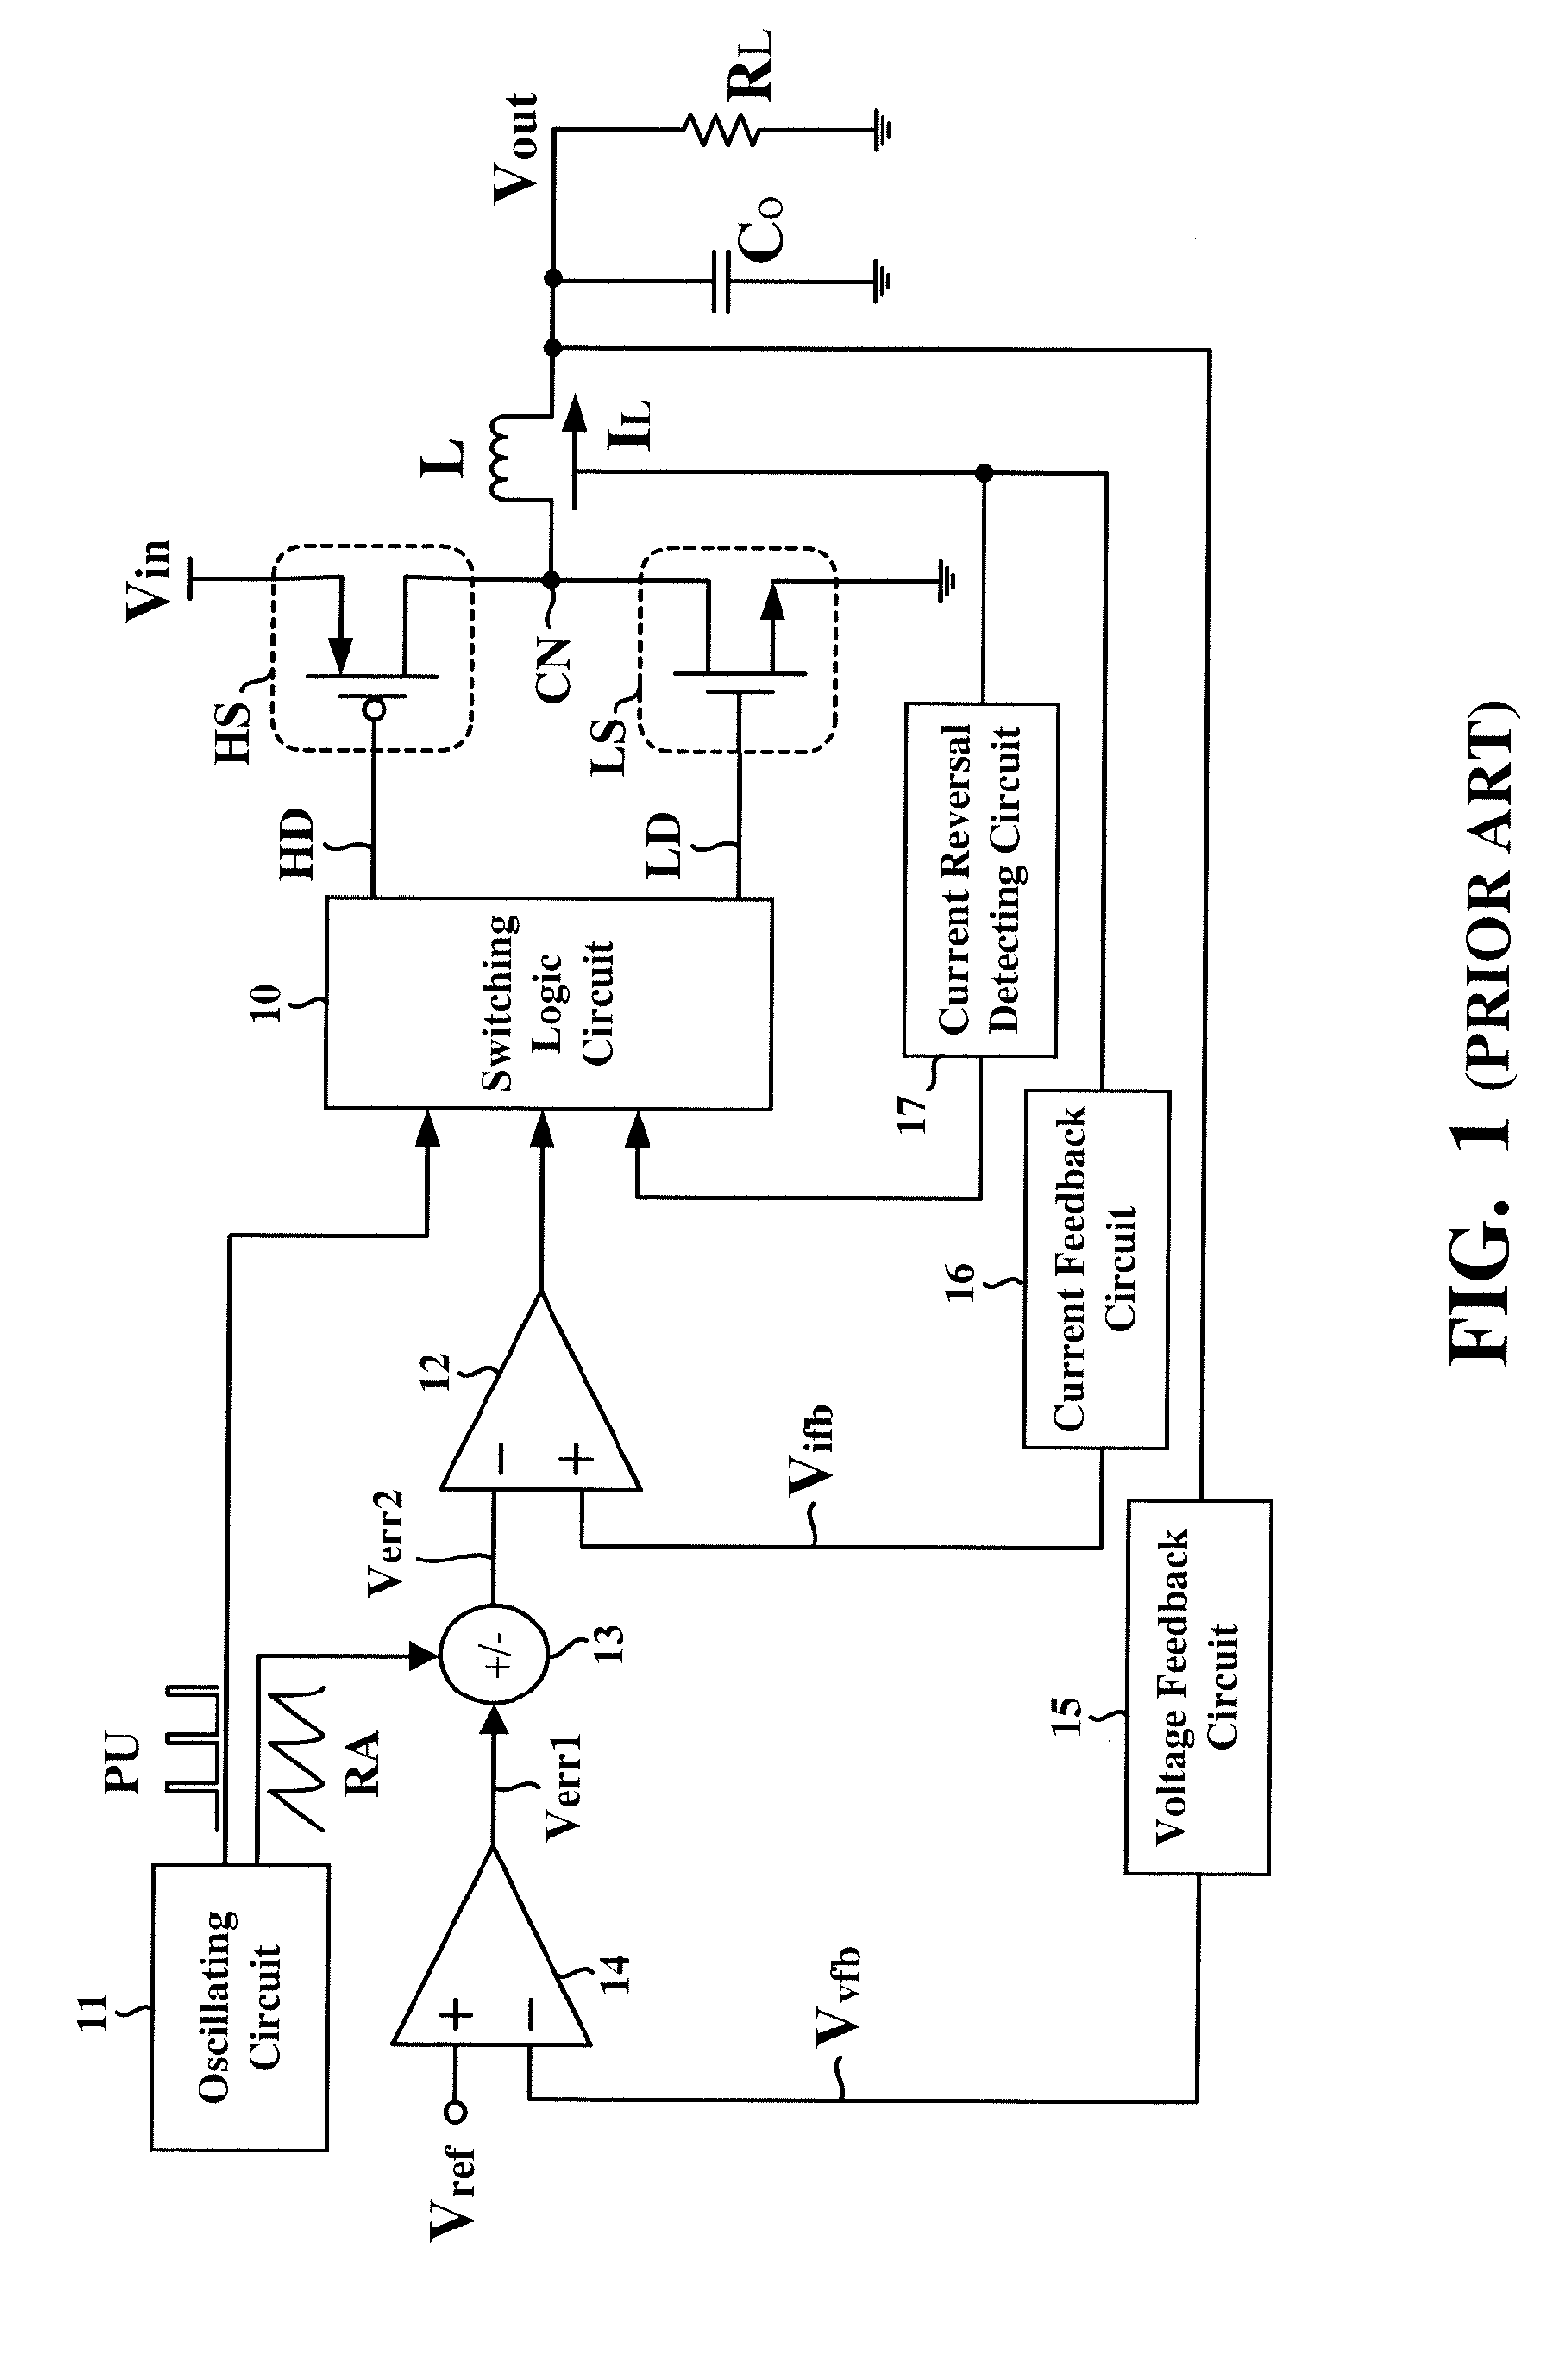 Switching voltage regulator operating without a discontinuous mode